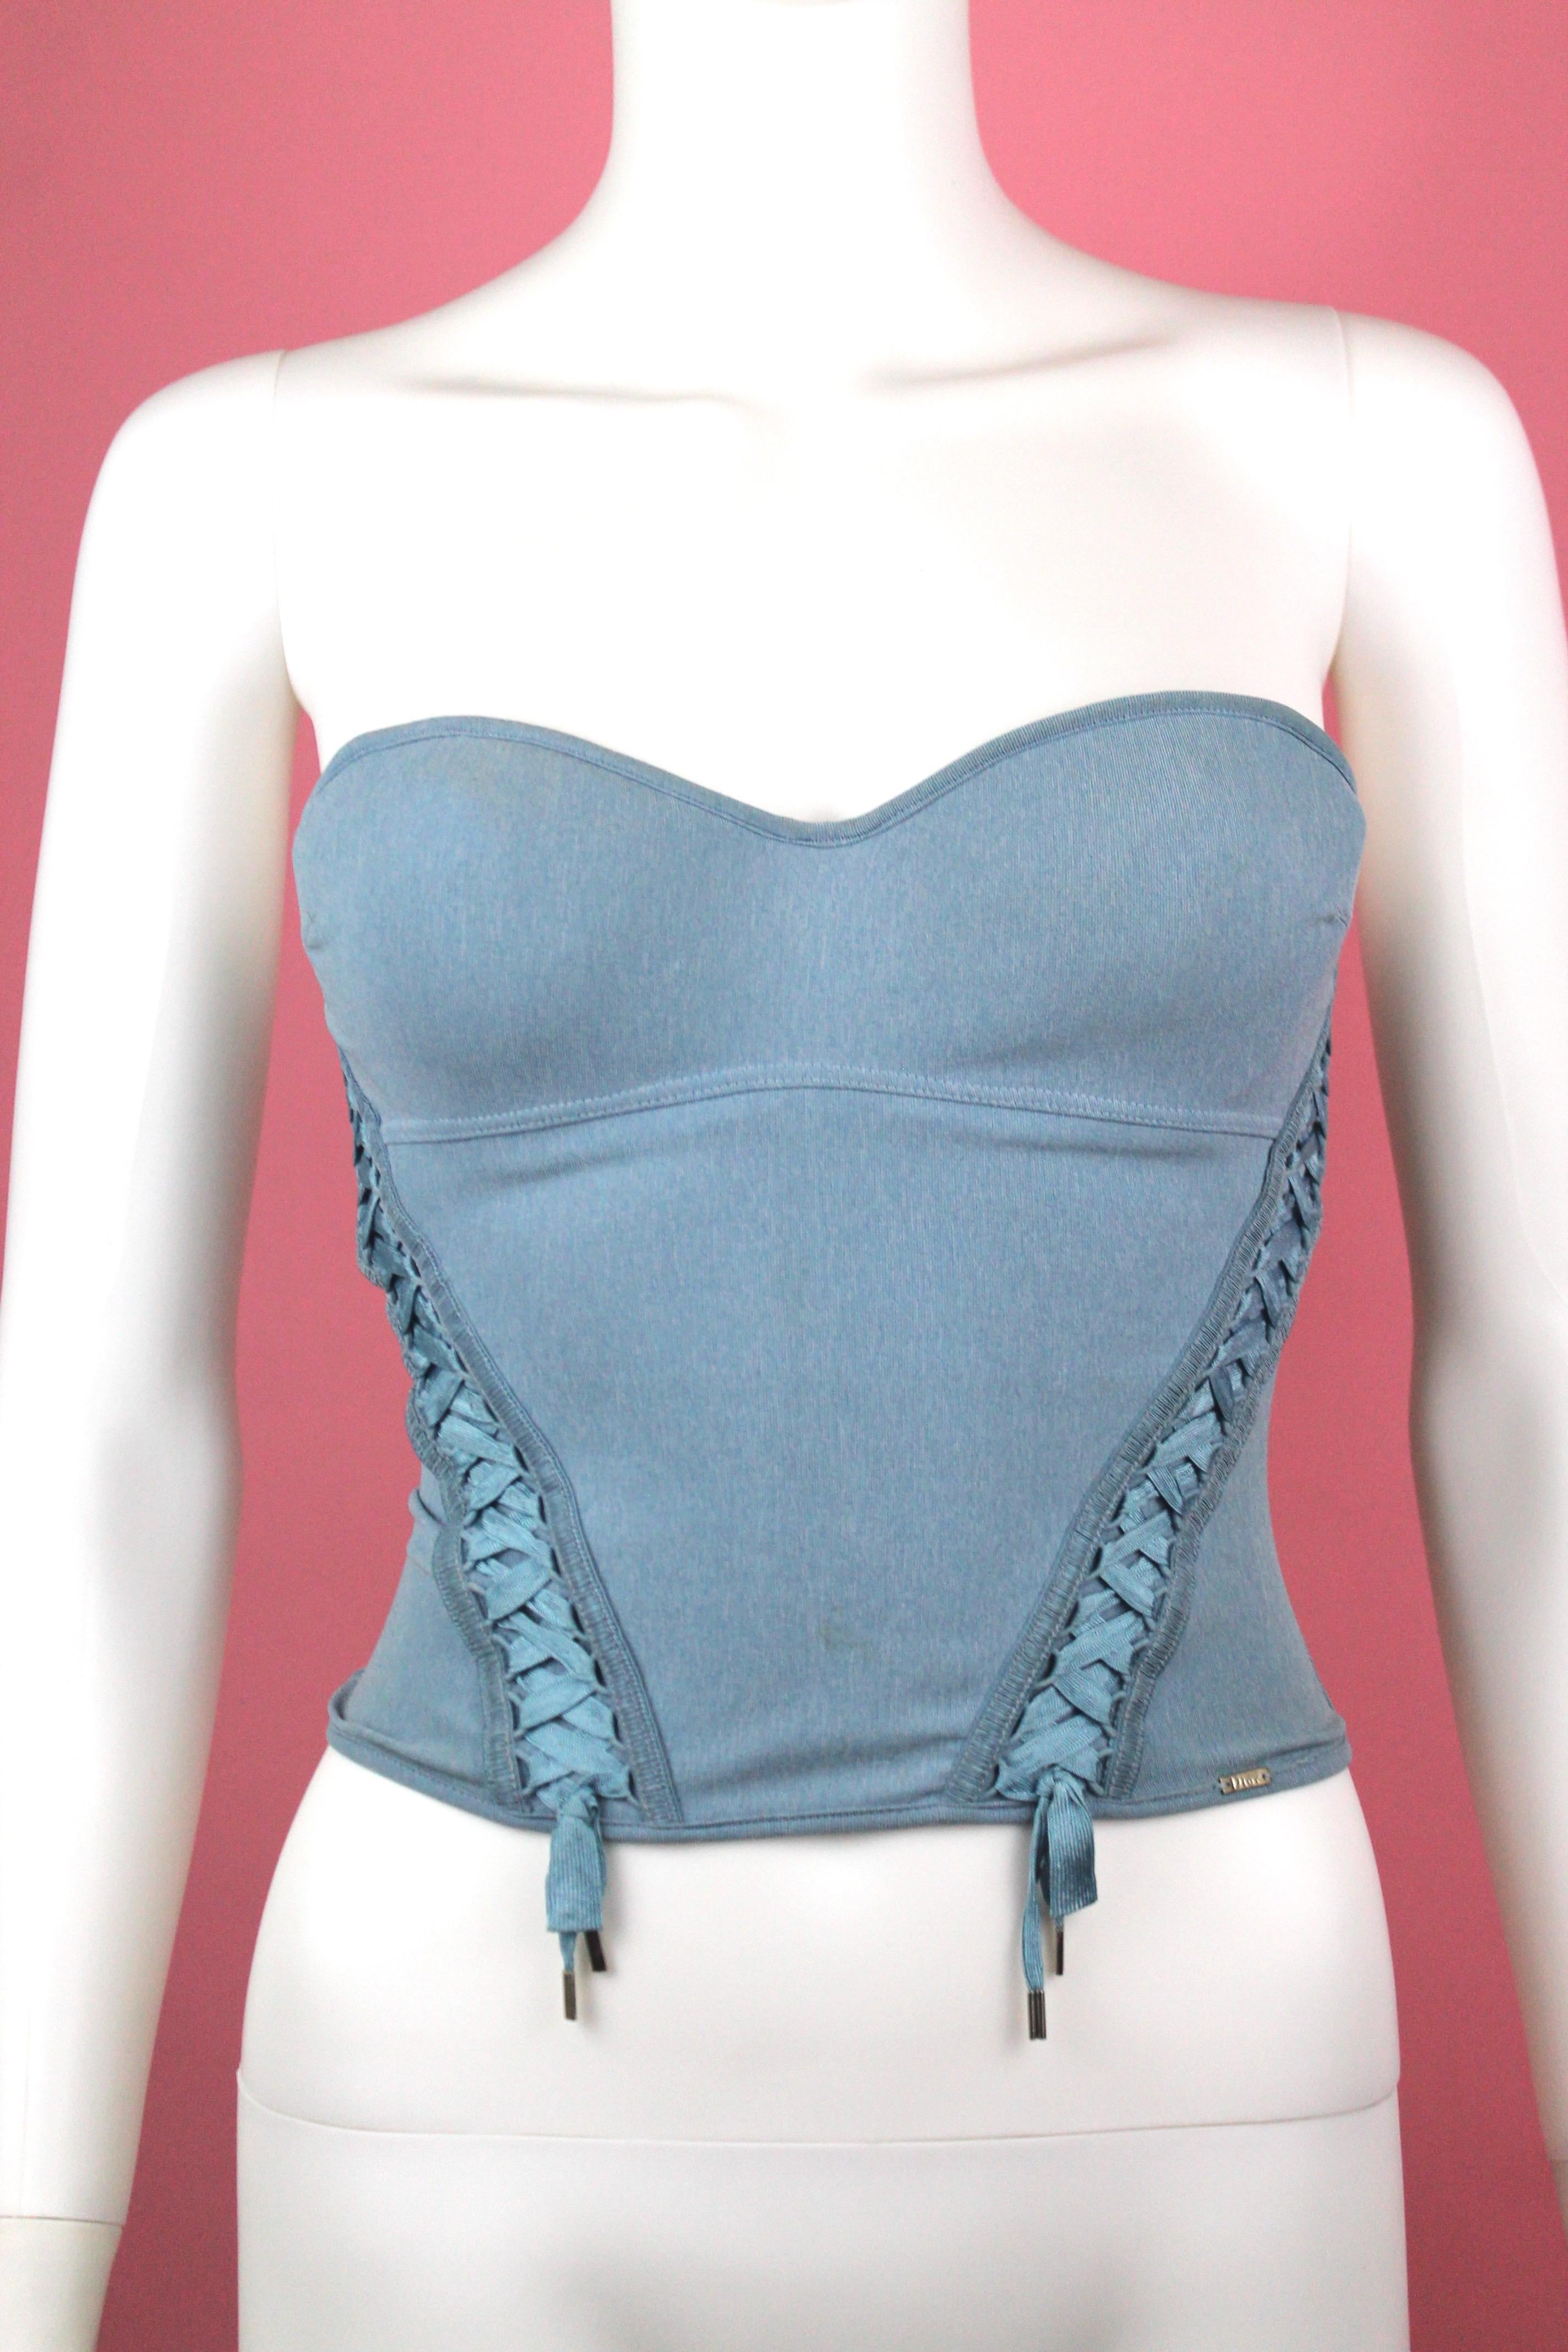 Christian Dior Light Blue Bustier with Lace Up Detail, c. 2000's, Size US 2 1